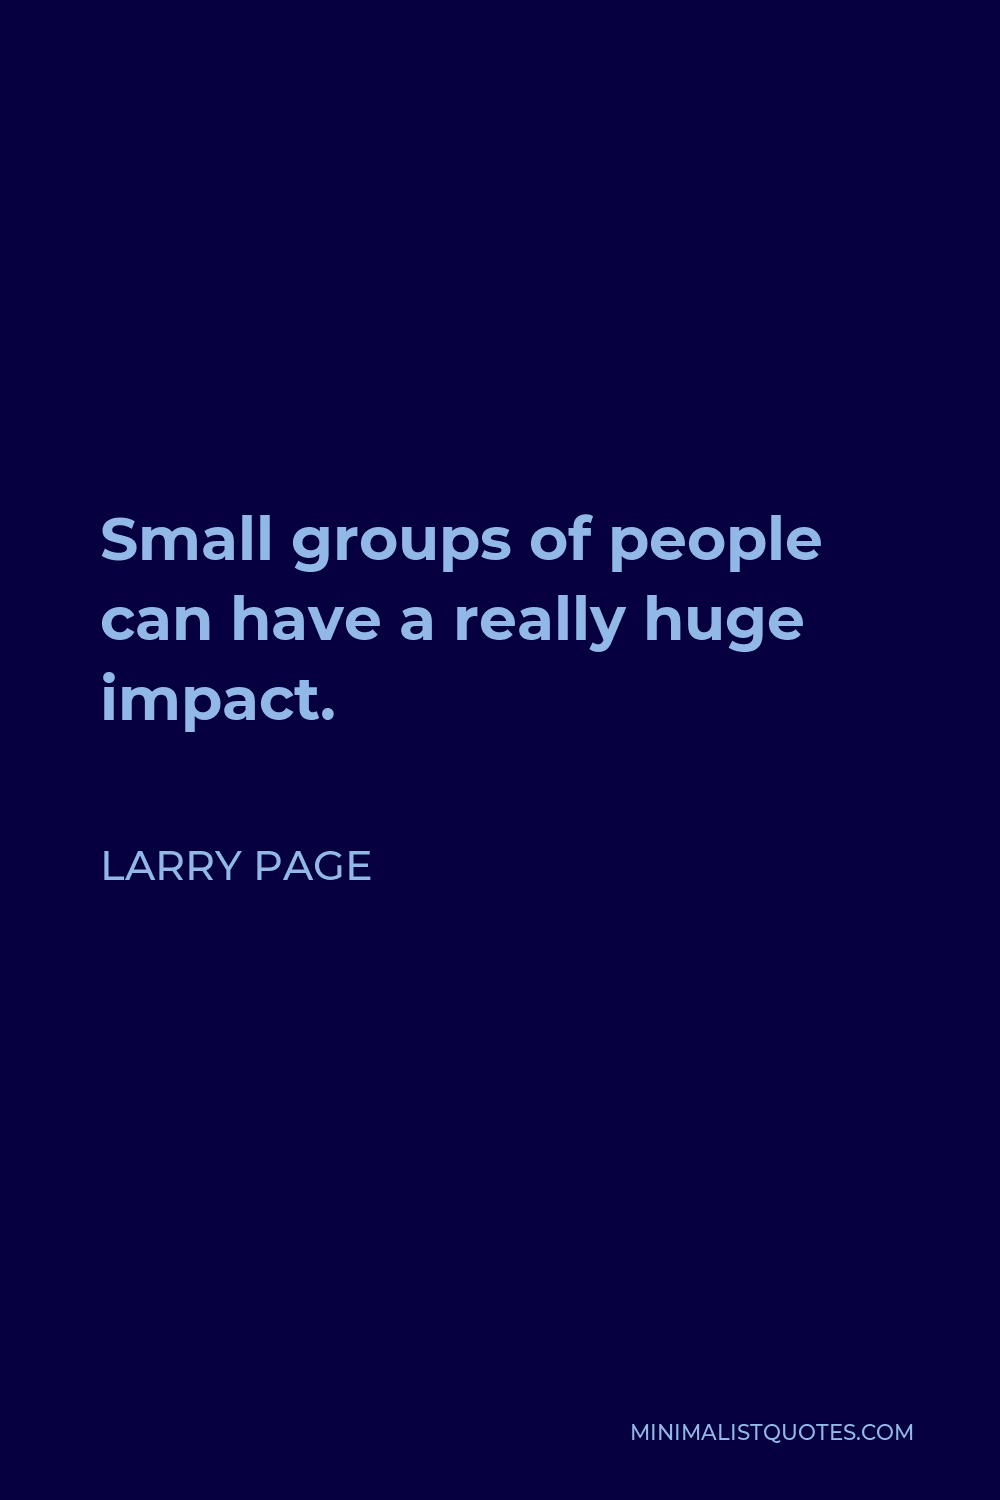 Larry Page Quote - Small groups of people can have a really huge impact.